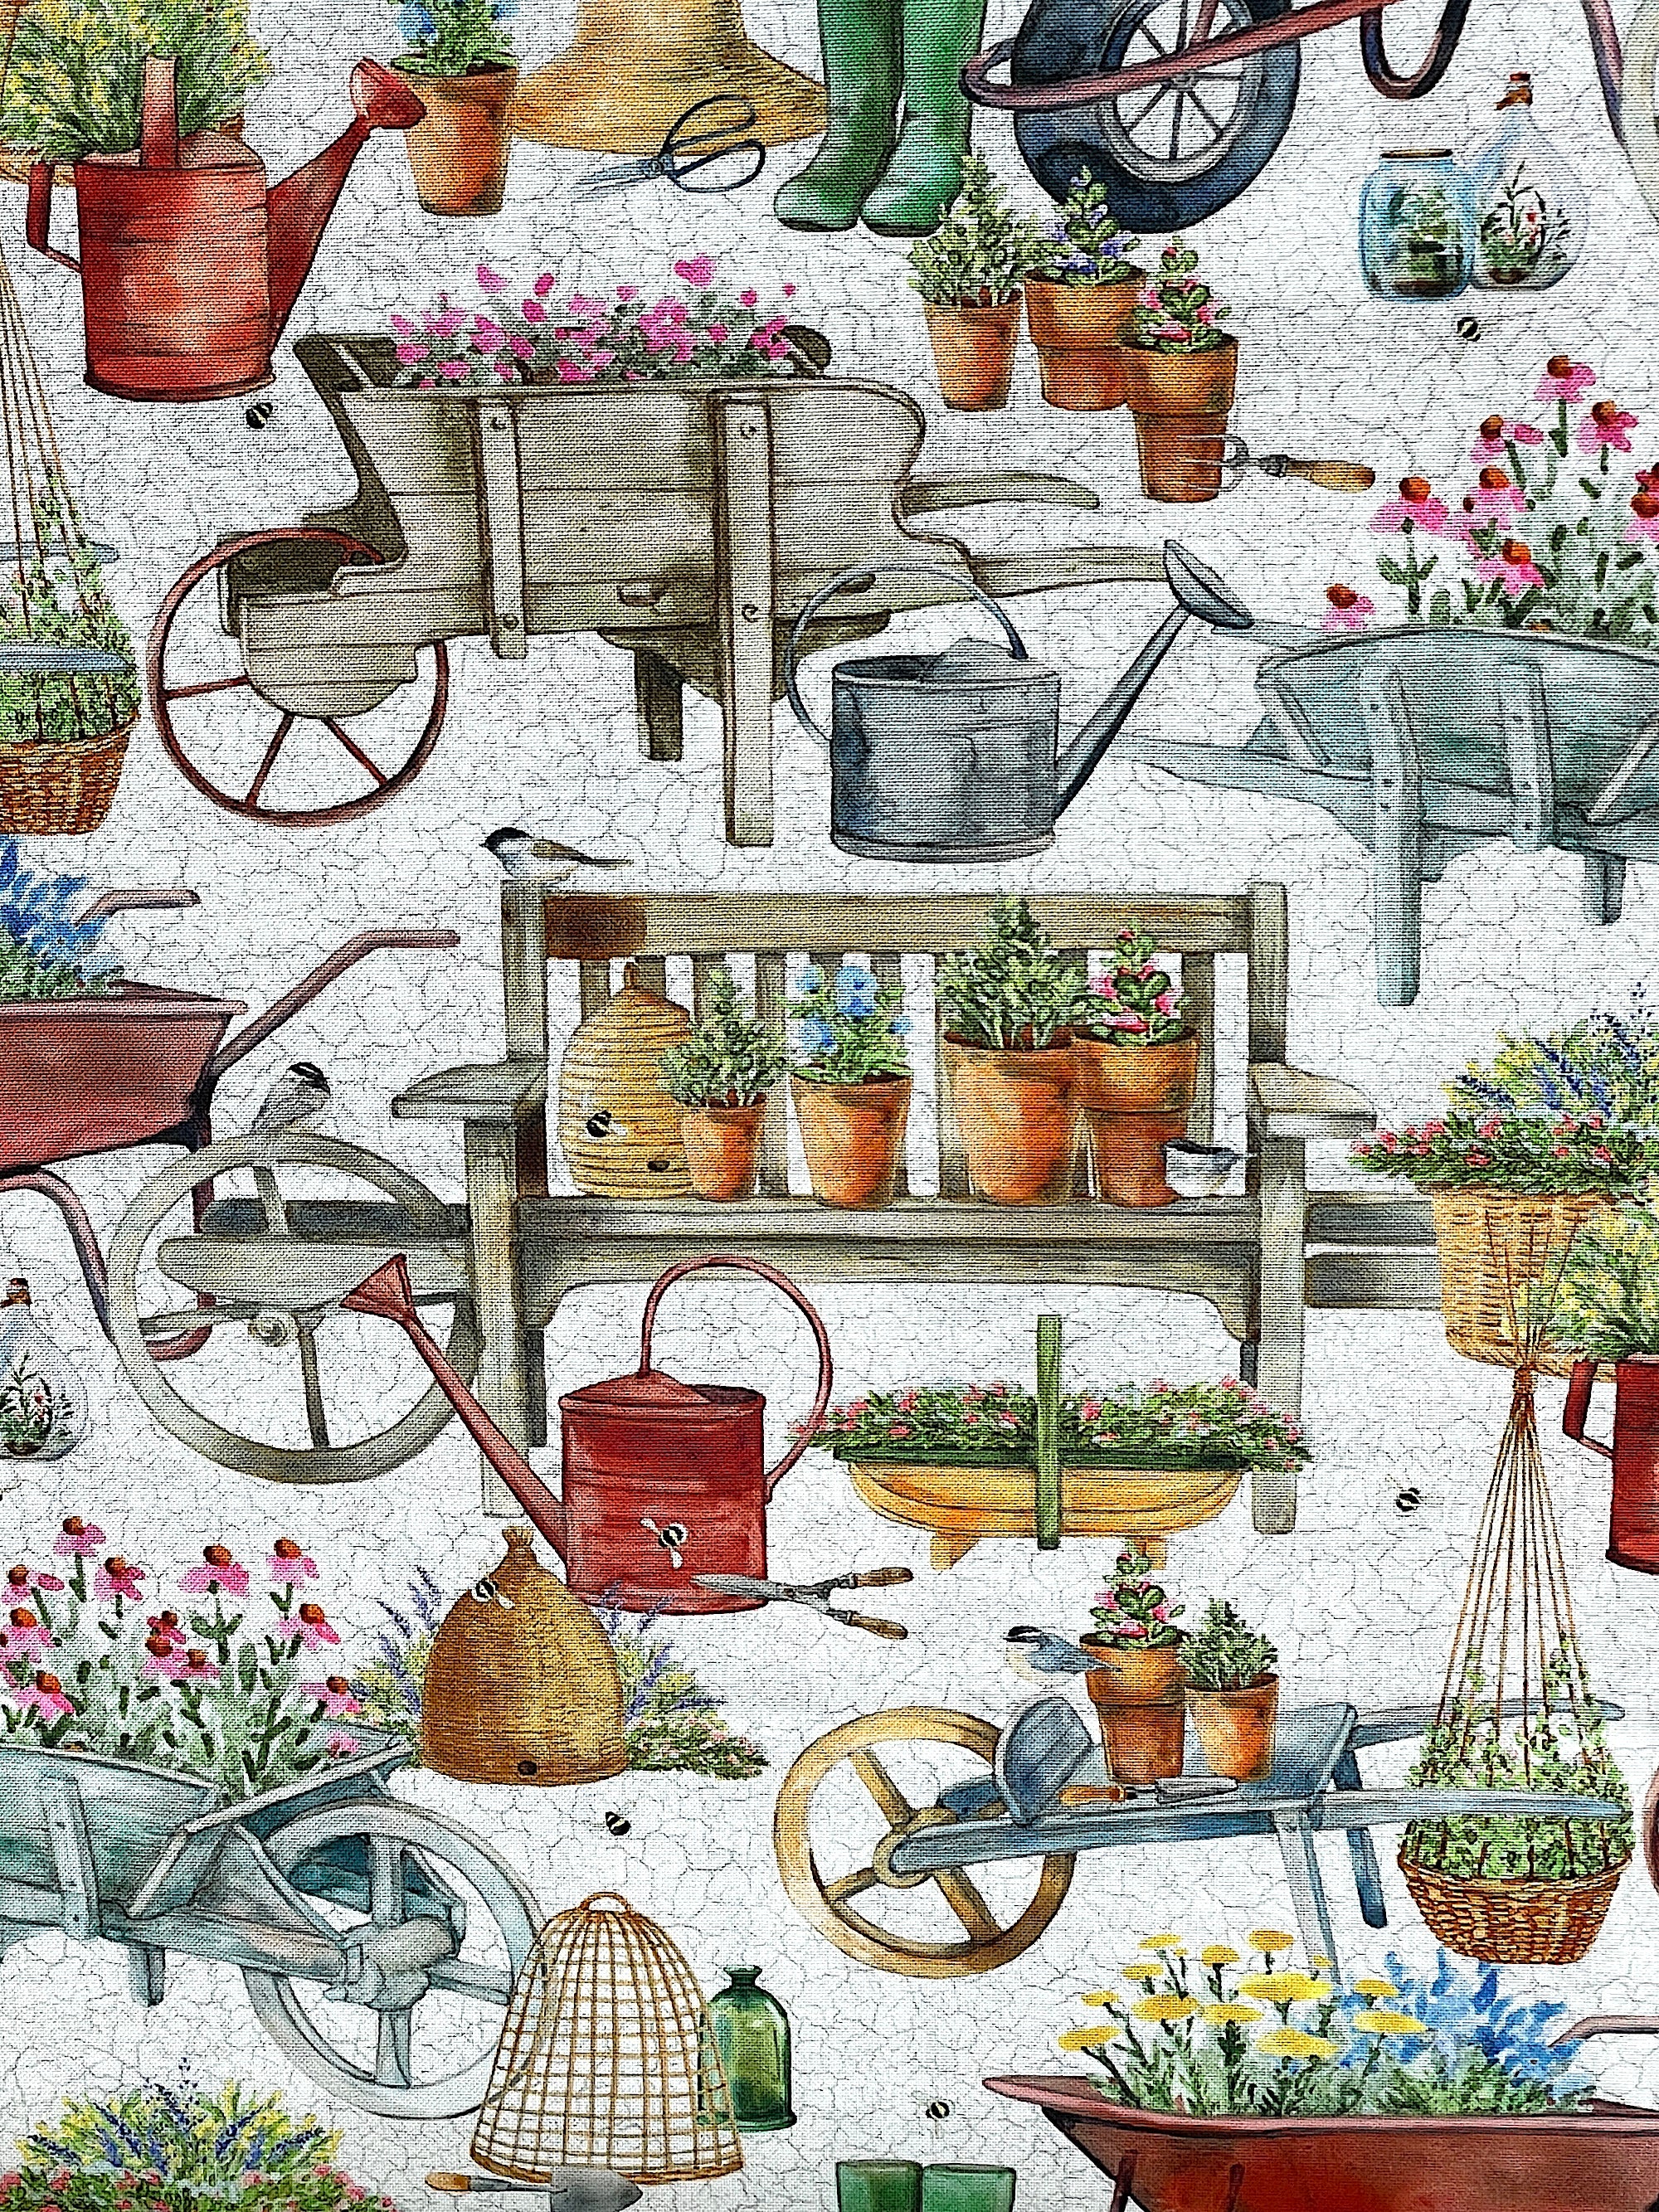 Close up of benches covered with pots of plants, watering cans and more.